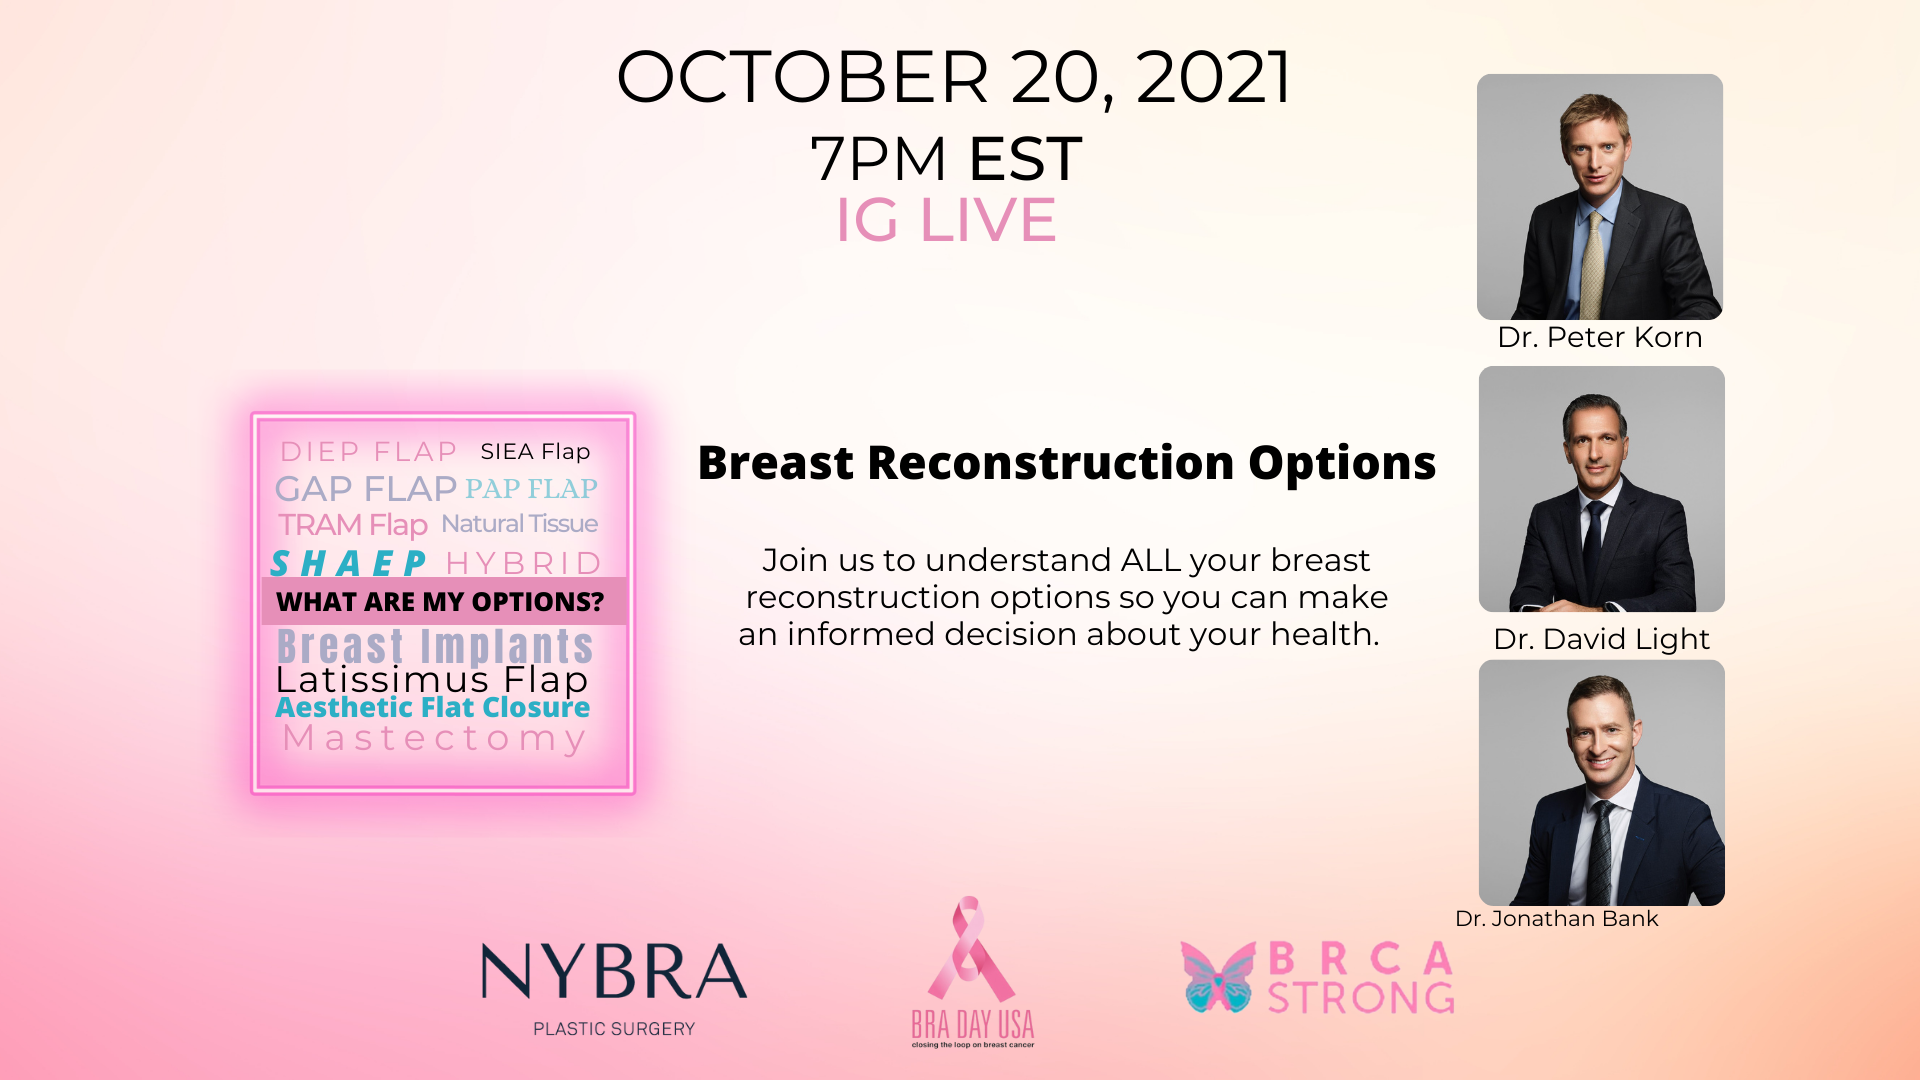 Pink shaded graphic with photos of Drs. Korn, Light and Bank promoting BRA Day Instagram Live on Oct. 20